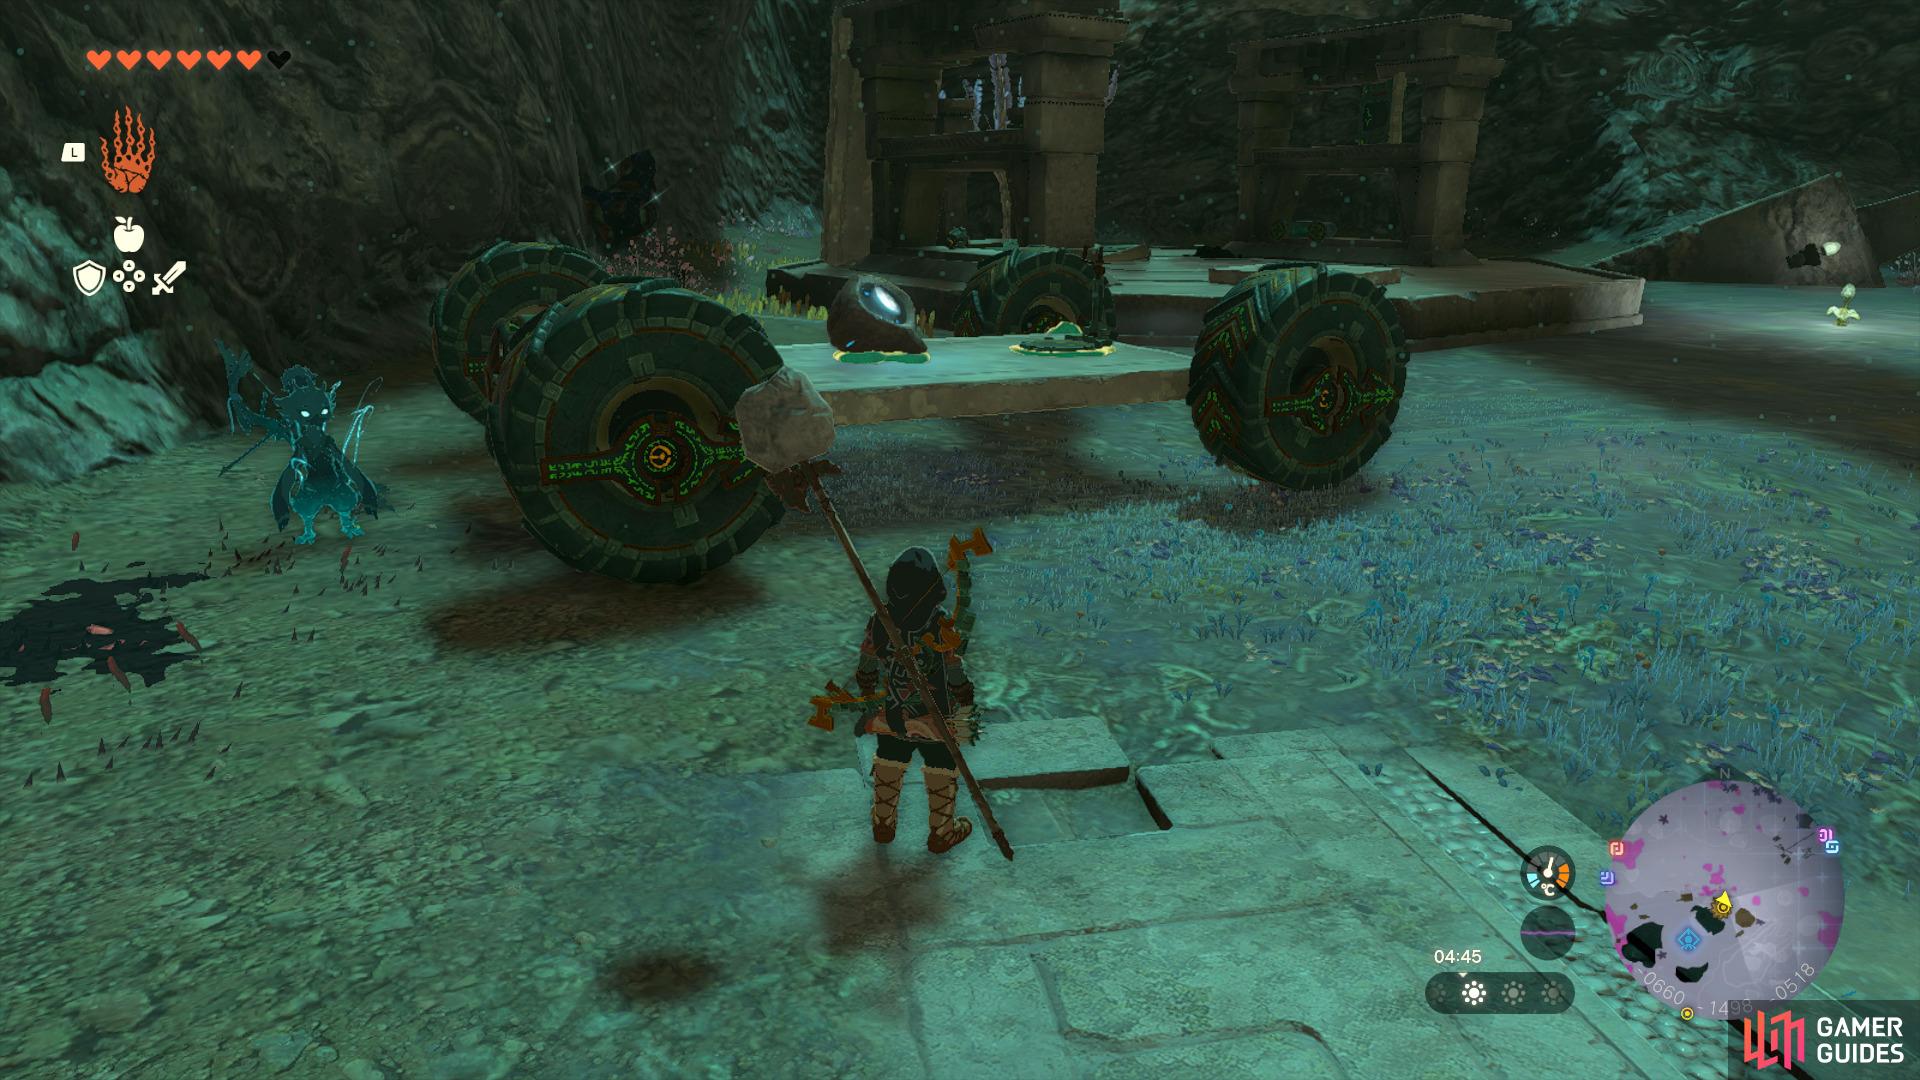 then use the ATV to reach the statue.